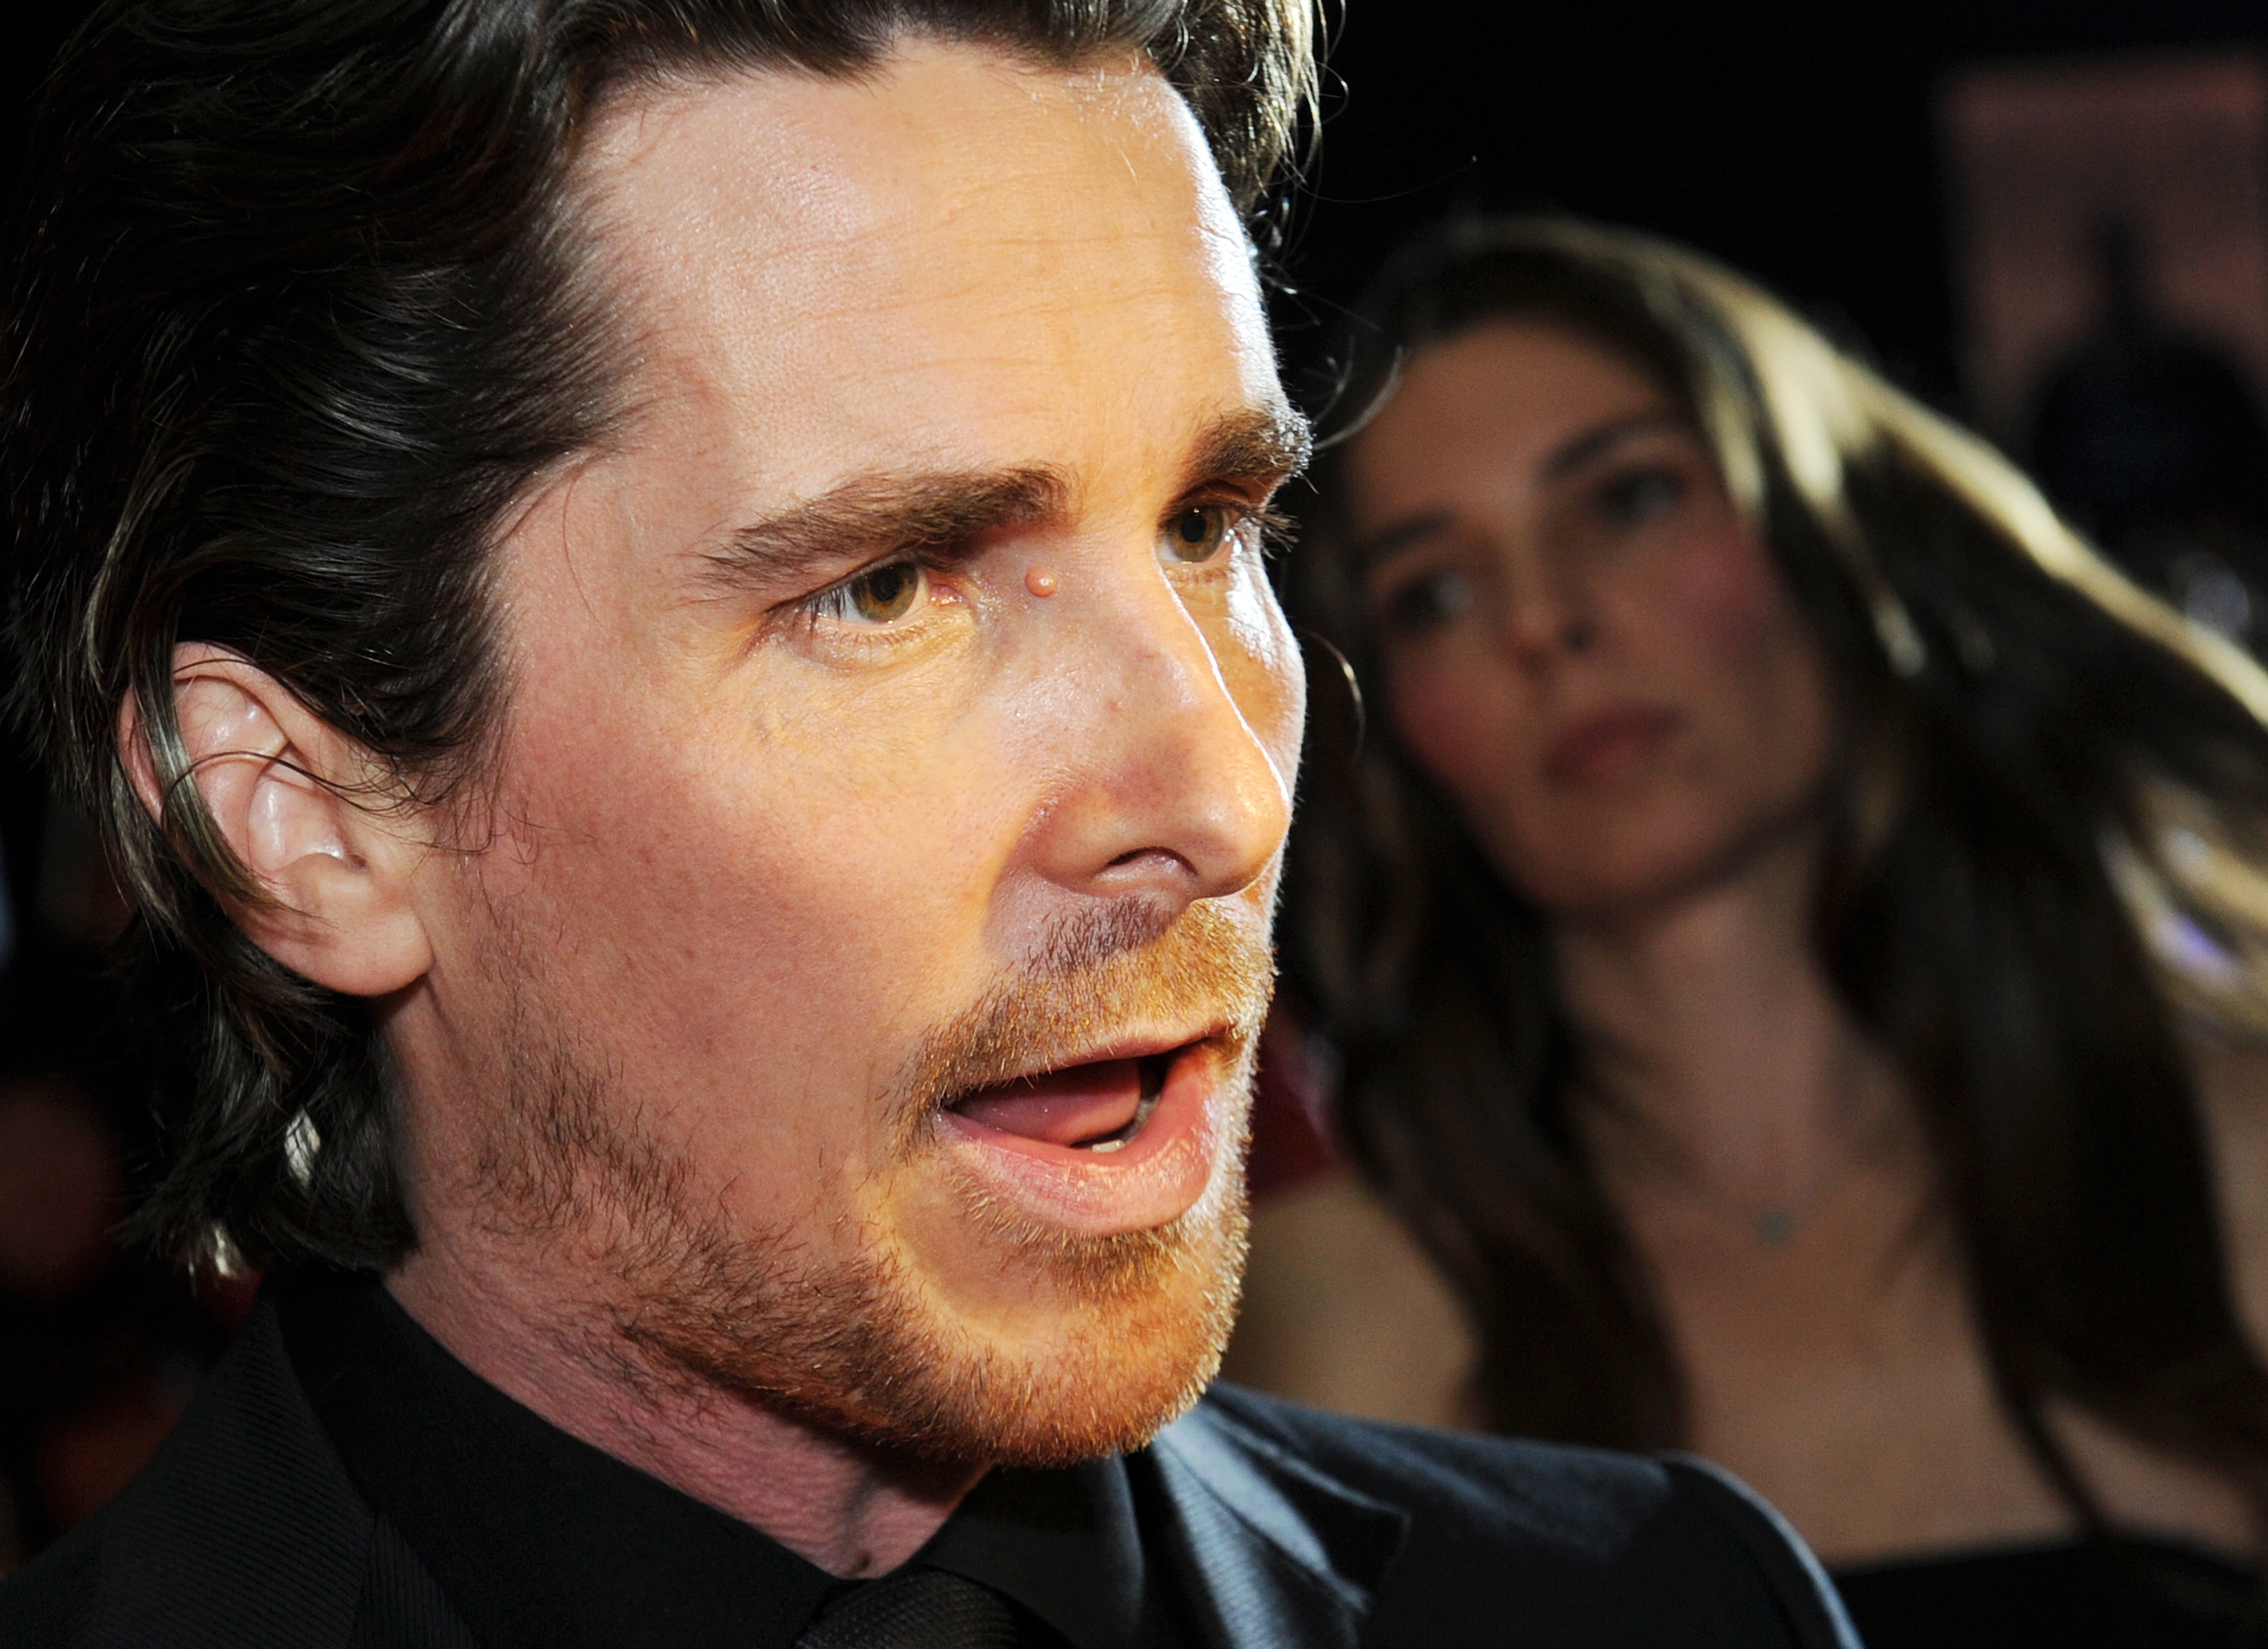 Christian Bale Knight of Cups. Pit stubble.